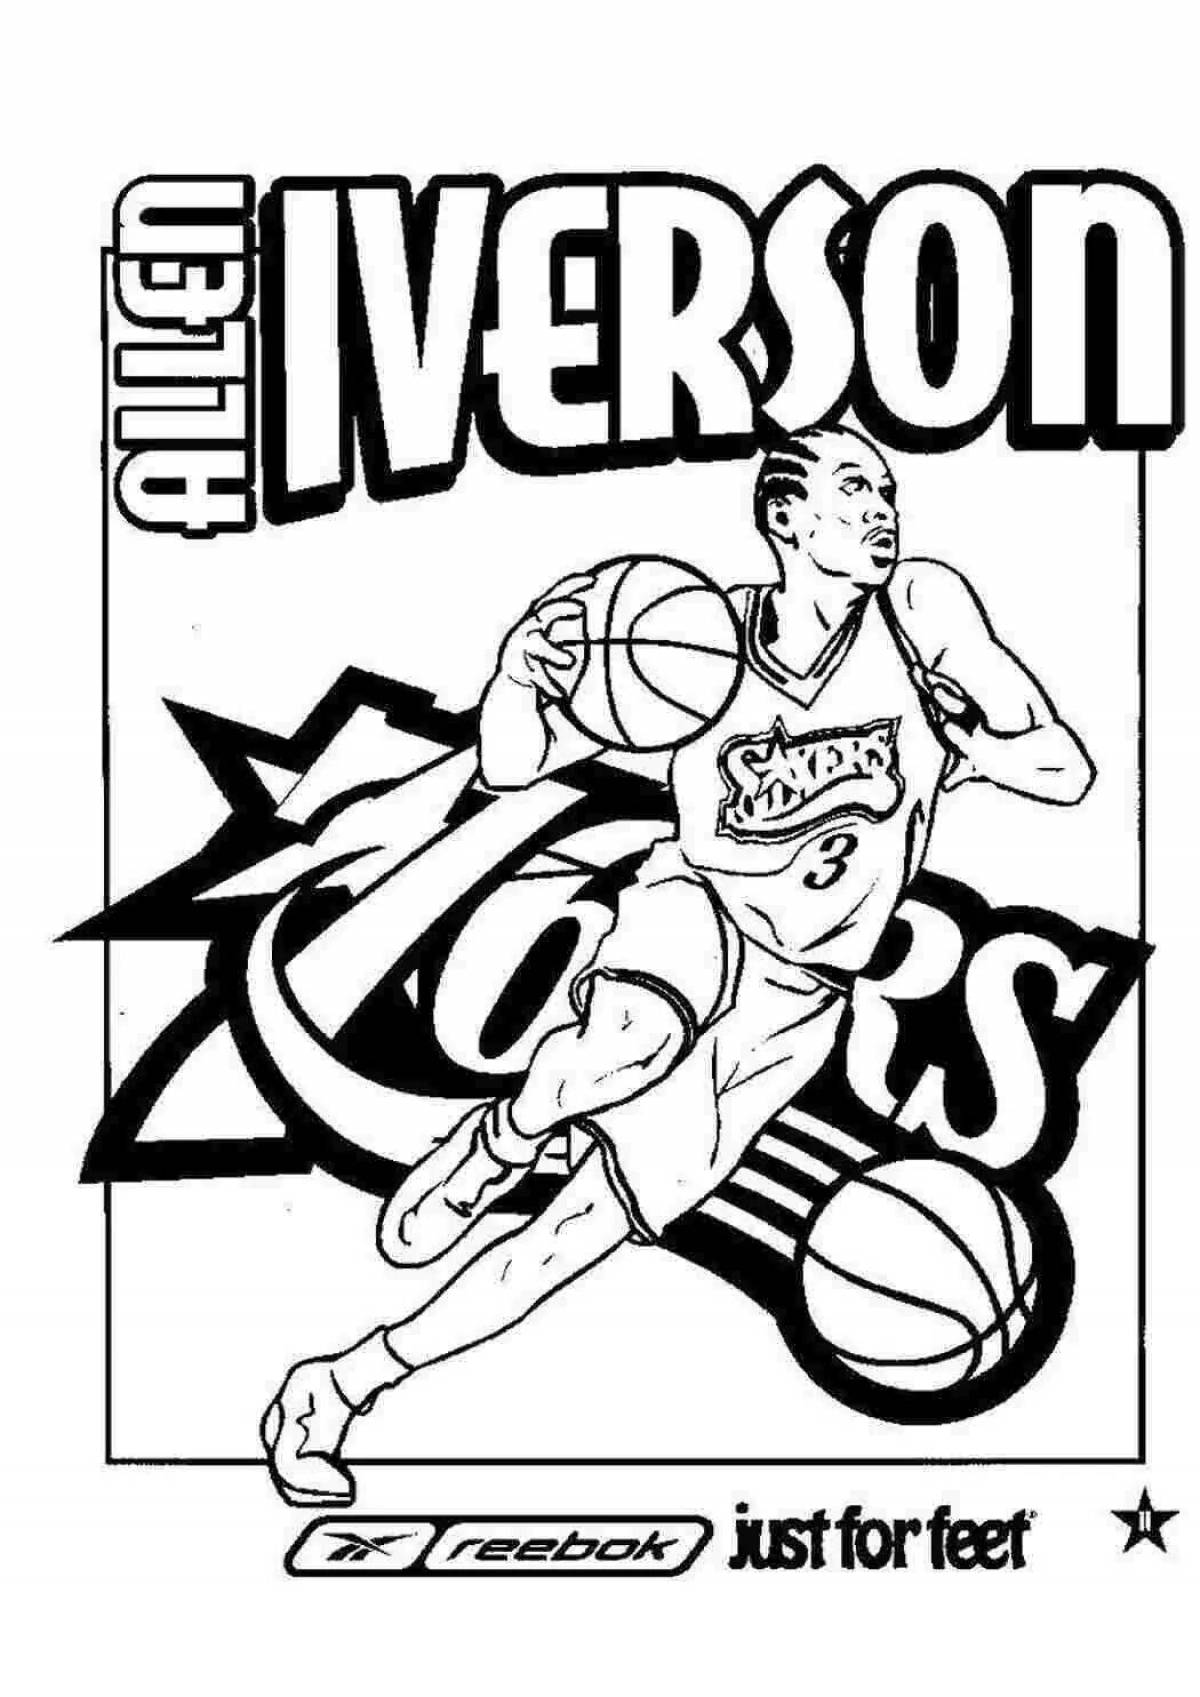 Great boxy boom coloring page